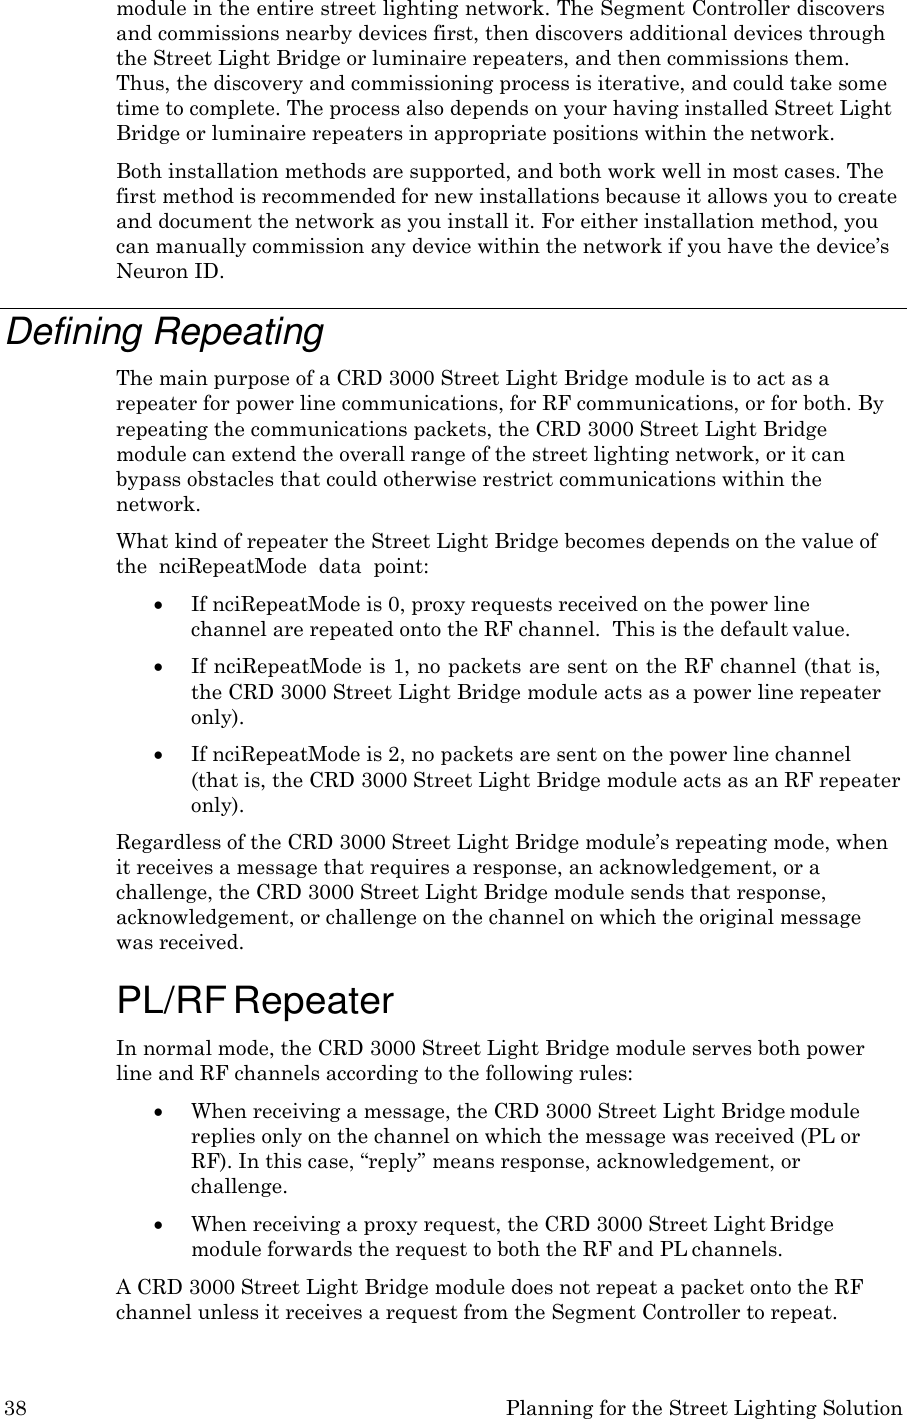 38 Planning for the Street Lighting Solution  module in the entire street lighting network. The Segment Controller discovers and commissions nearby devices first, then discovers additional devices through the Street Light Bridge or luminaire repeaters, and then commissions them. Thus, the discovery and commissioning process is iterative, and could take some time to complete. The process also depends on your having installed Street Light Bridge or luminaire repeaters in appropriate positions within the network. Both installation methods are supported, and both work well in most cases. The first method is recommended for new installations because it allows you to create and document the network as you install it. For either installation method, you can manually commission any device within the network if you have the device’s Neuron ID.  Defining Repeating The main purpose of a CRD 3000 Street Light Bridge module is to act as a repeater for power line communications, for RF communications, or for both. By repeating the communications packets, the CRD 3000 Street Light Bridge module can extend the overall range of the street lighting network, or it can bypass obstacles that could otherwise restrict communications within the network. What kind of repeater the Street Light Bridge becomes depends on the value of the  nciRepeatMode  data  point:  If nciRepeatMode is 0, proxy requests received on the power line channel are repeated onto the RF channel.  This is the default value.  If nciRepeatMode is 1, no packets are sent on the RF channel (that is, the CRD 3000 Street Light Bridge module acts as a power line repeater only).  If nciRepeatMode is 2, no packets are sent on the power line channel  (that is, the CRD 3000 Street Light Bridge module acts as an RF repeater only). Regardless of the CRD 3000 Street Light Bridge module’s repeating mode, when it receives a message that requires a response, an acknowledgement, or a challenge, the CRD 3000 Street Light Bridge module sends that response, acknowledgement, or challenge on the channel on which the original message was received.  PL/RF Repeater In normal mode, the CRD 3000 Street Light Bridge module serves both power line and RF channels according to the following rules:  When receiving a message, the CRD 3000 Street Light Bridge module replies only on the channel on which the message was received (PL or RF). In this case, “reply” means response, acknowledgement, or challenge.  When receiving a proxy request, the CRD 3000 Street Light Bridge module forwards the request to both the RF and PL channels. A CRD 3000 Street Light Bridge module does not repeat a packet onto the RF channel unless it receives a request from the Segment Controller to repeat. 